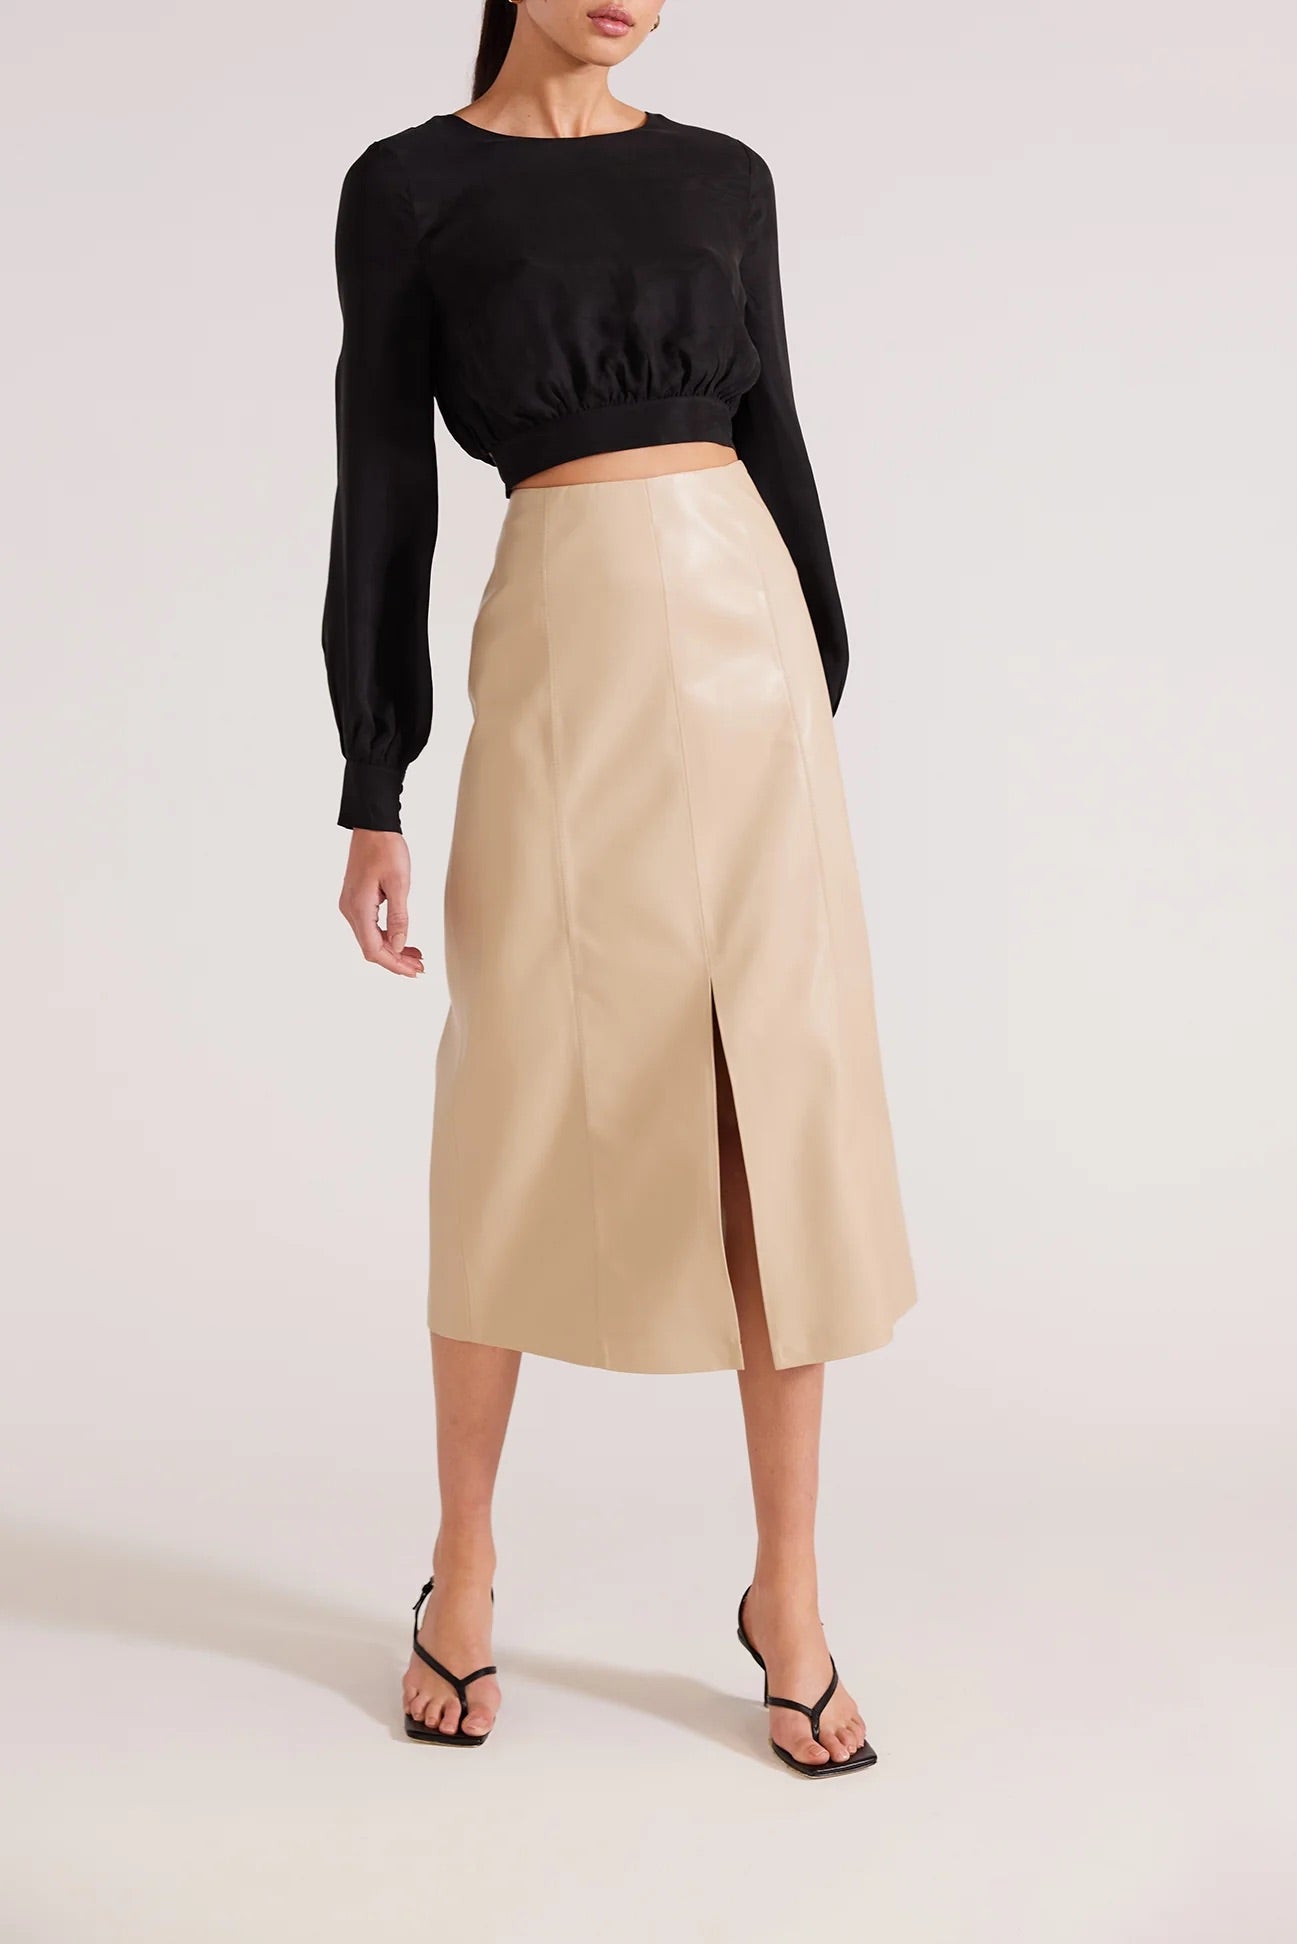 Outline Clothing is delighted to bring you this premium faux leather skirt which exudes classic sophistication and elegance.